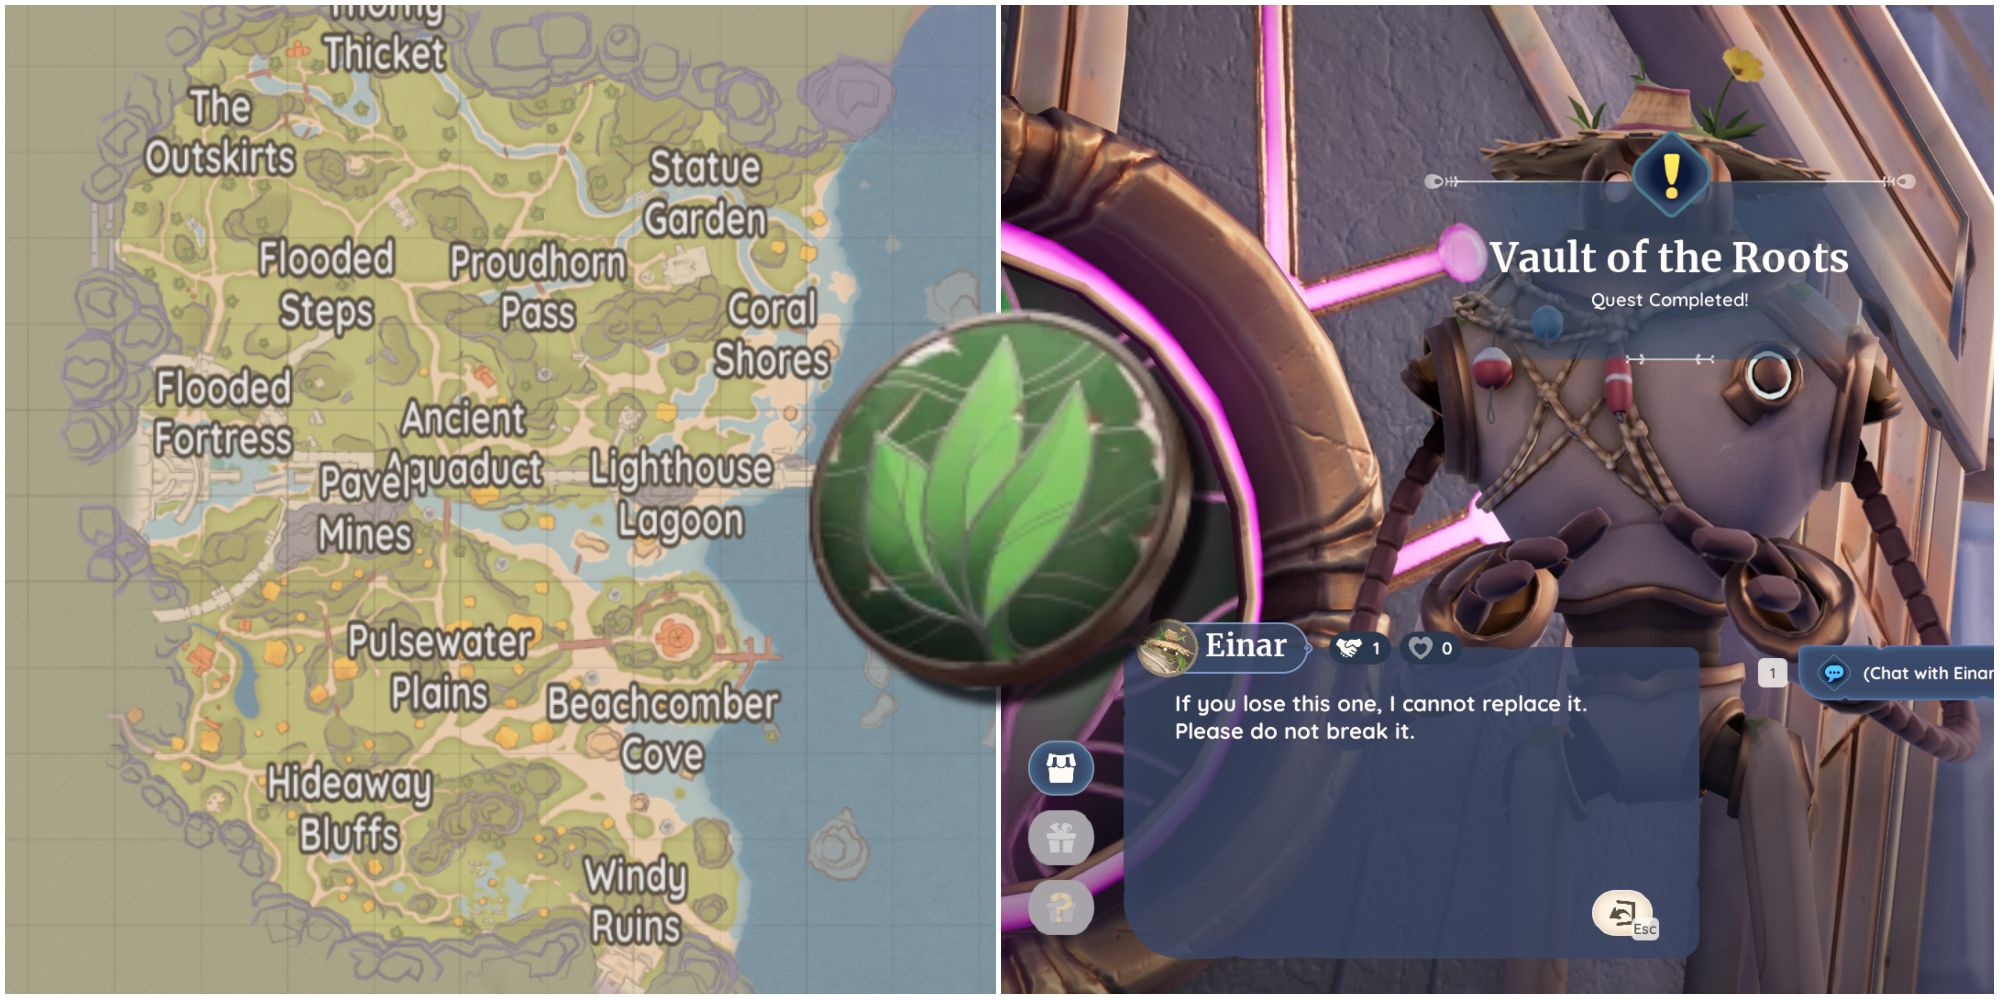 The map of Bahari Bay, a Rootseeker Medallion, and Einar after the completion of the Vault of the Roots